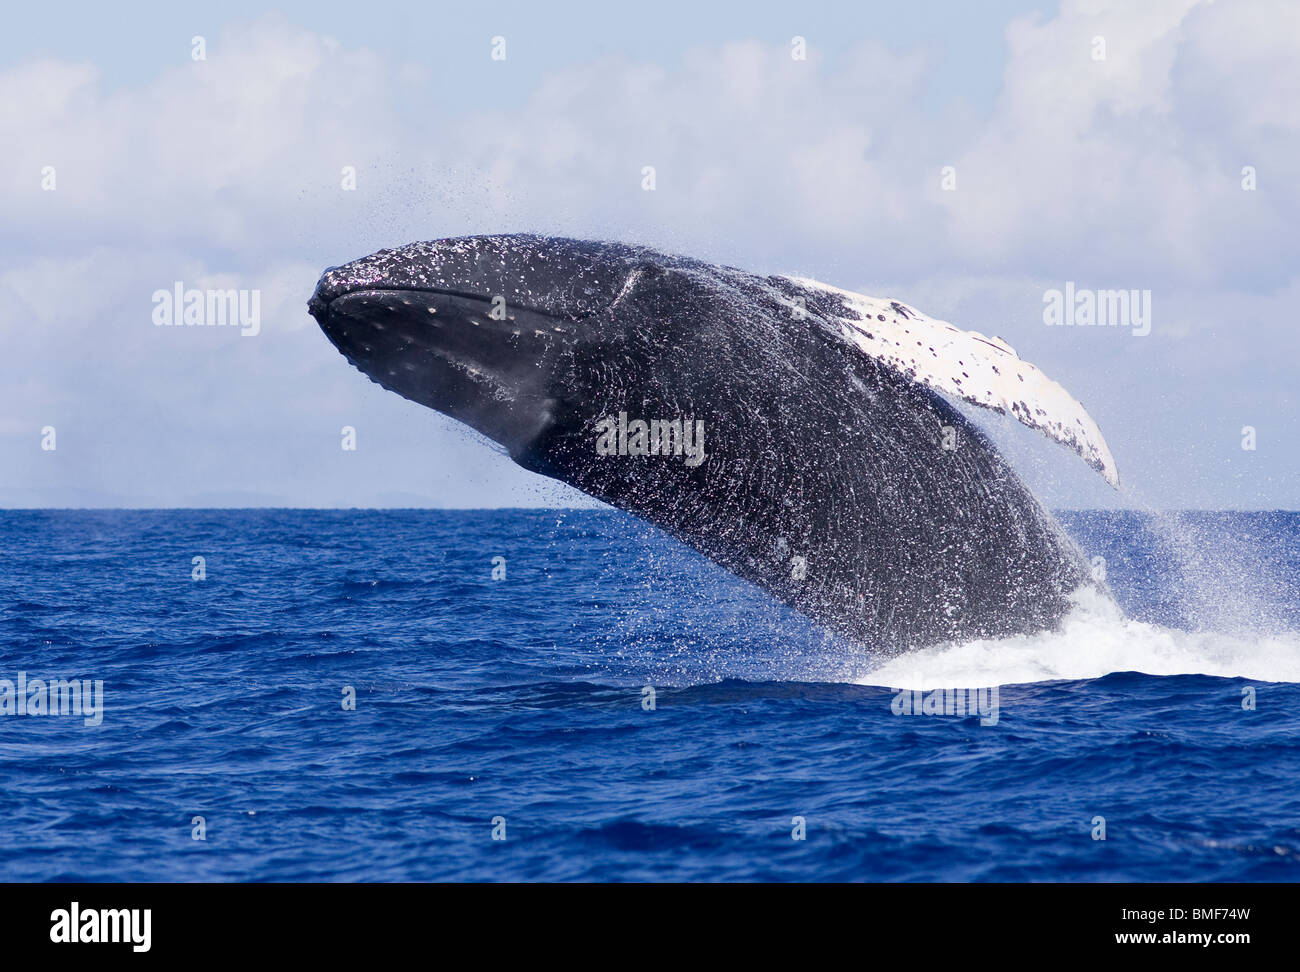 Humpback whale breaching with clouds in the background near Maui, Hawaii. Stock Photo